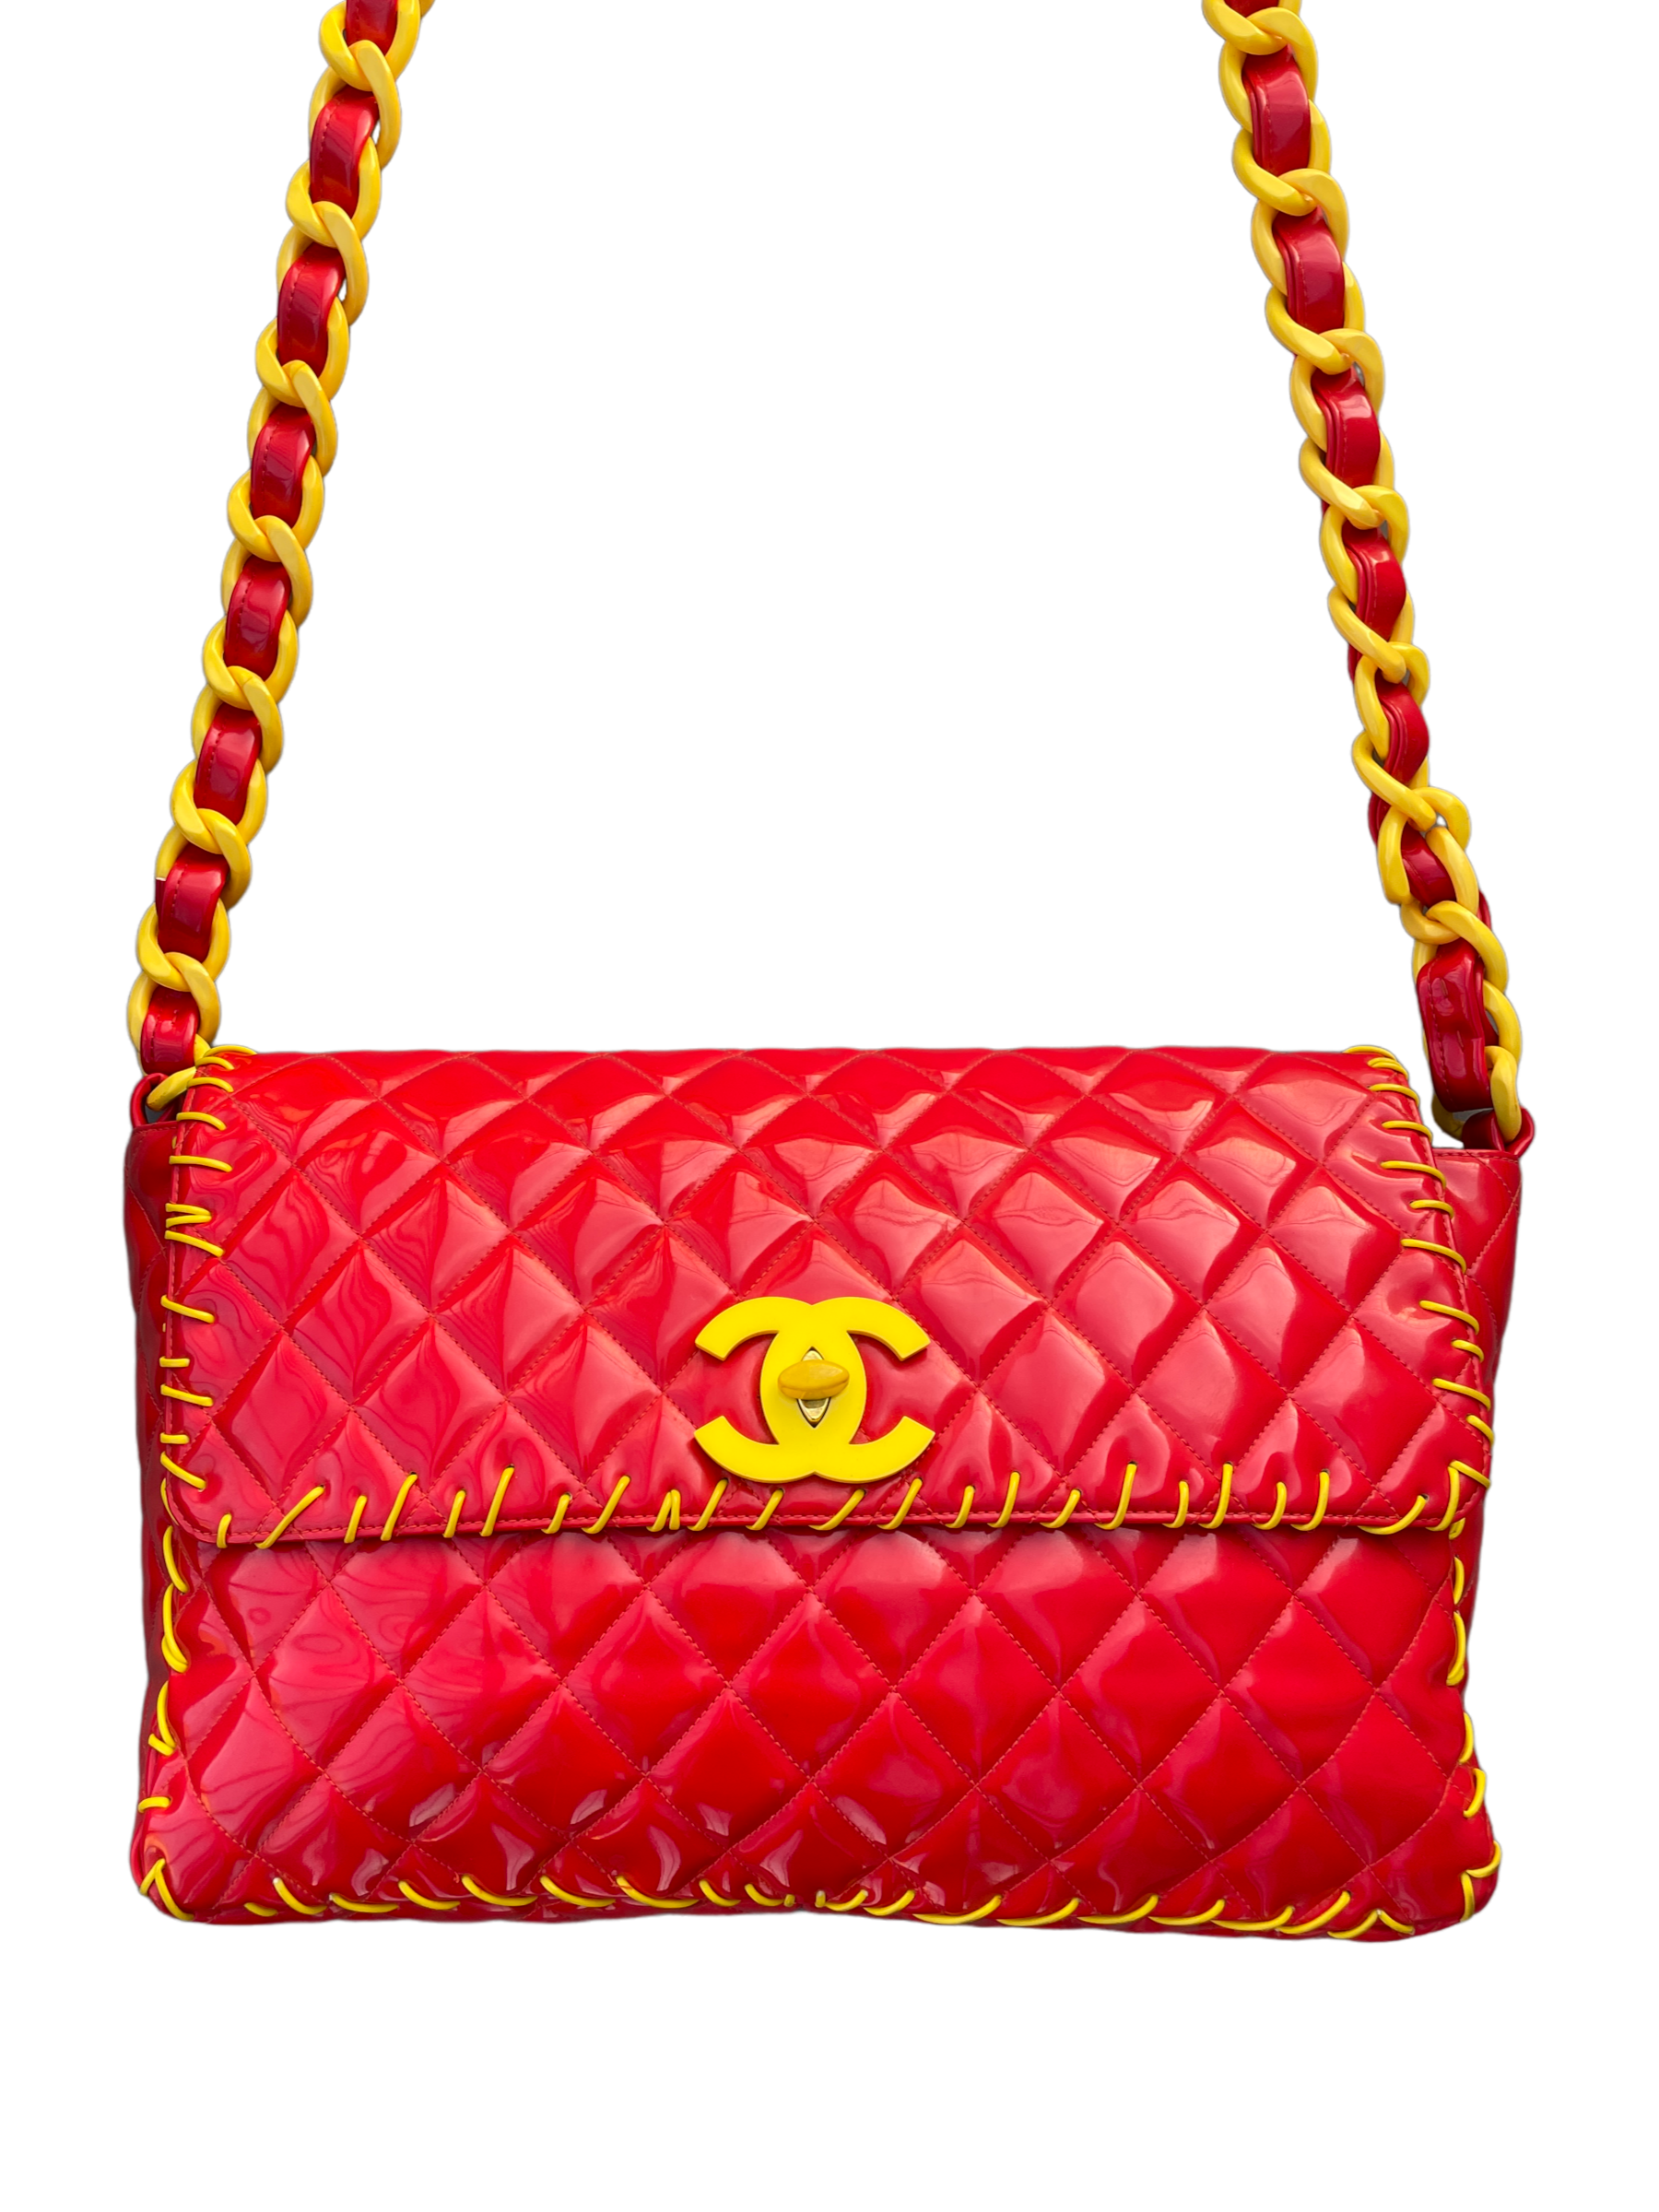 Chanel 1994 by Karl Lagerfeld Red Vinyl Maxi Rare Flap